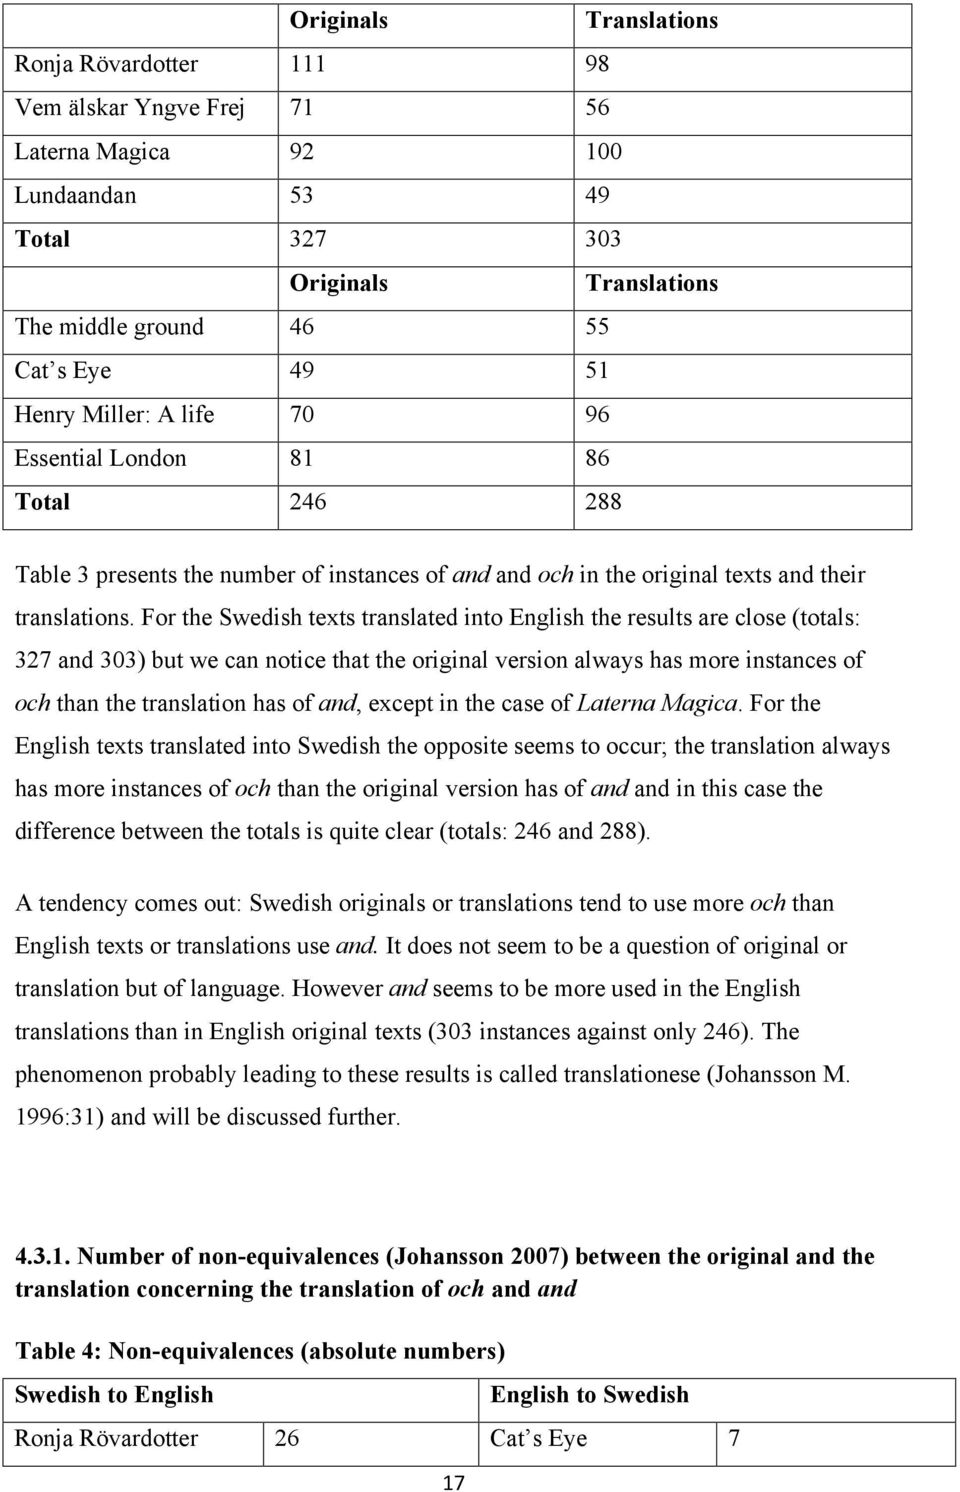 For the Swedish texts translated into English the results are close (totals: 327 and 303) but we can notice that the original version always has more instances of och than the translation has of and,